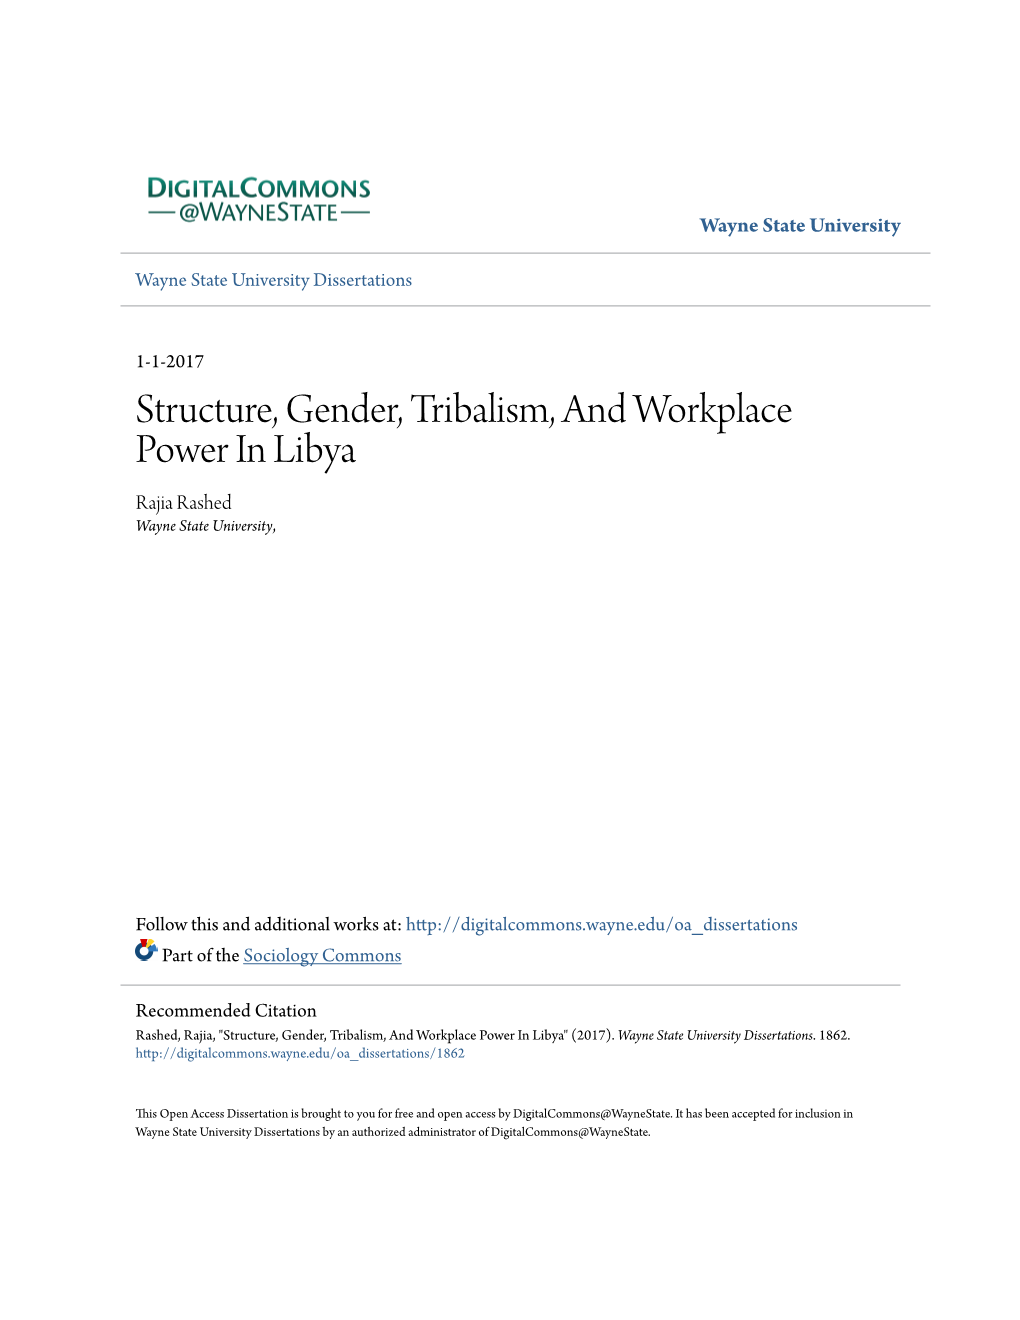 Structure, Gender, Tribalism, and Workplace Power in Libya Rajia Rashed Wayne State University